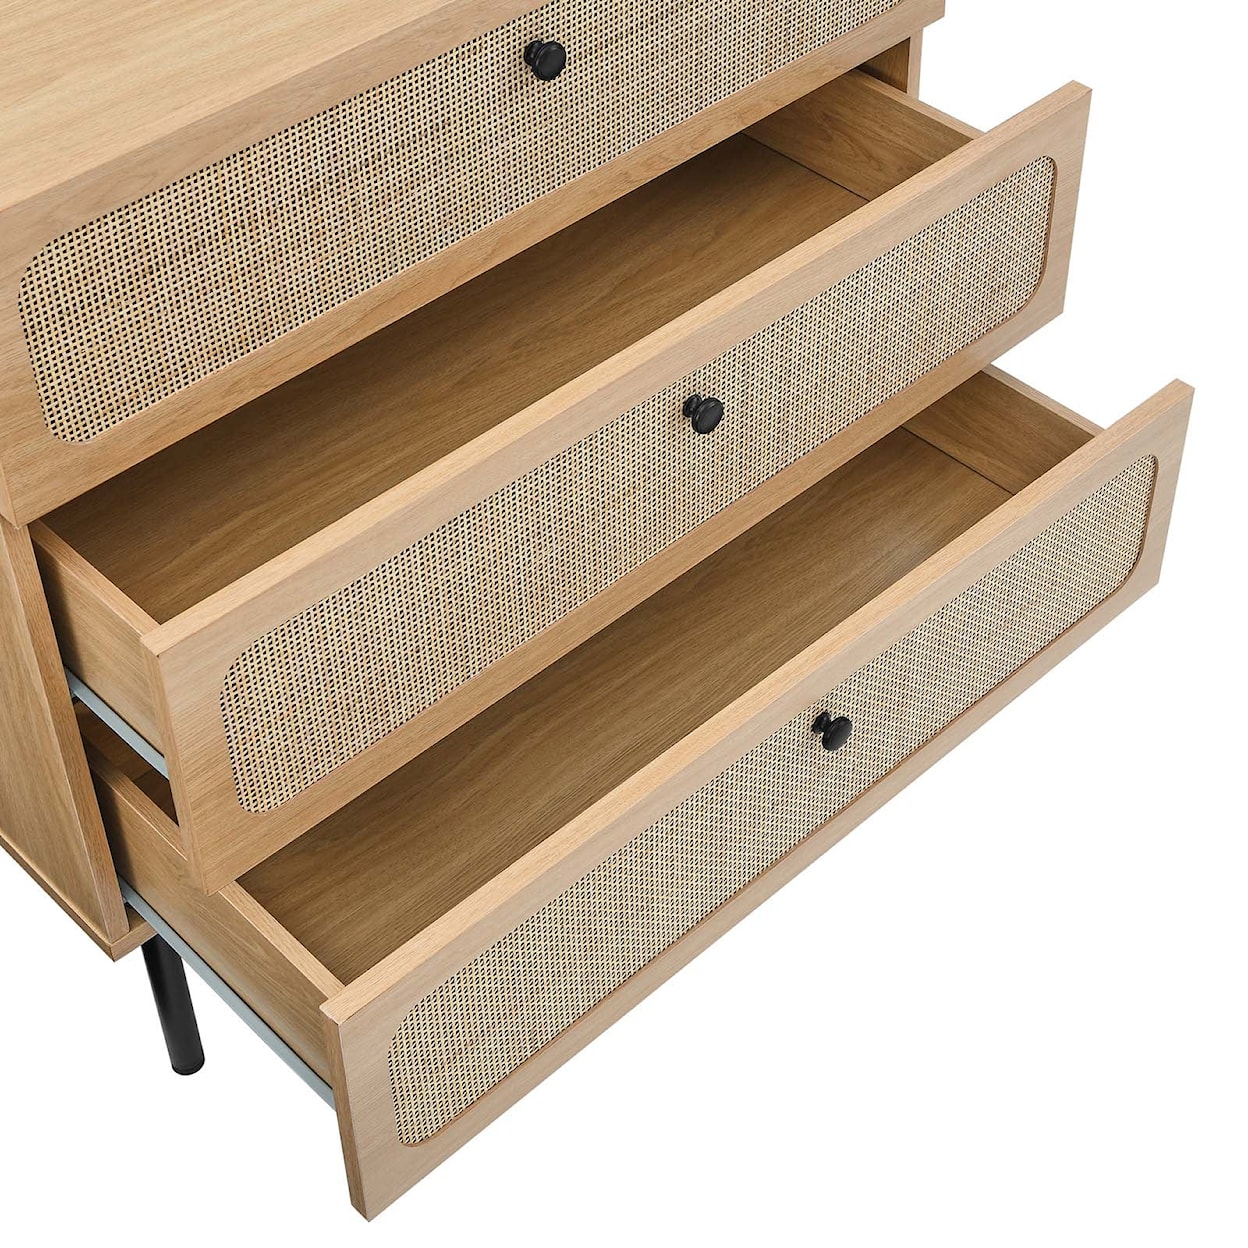 Modway Chaucer 3-Drawer Chest